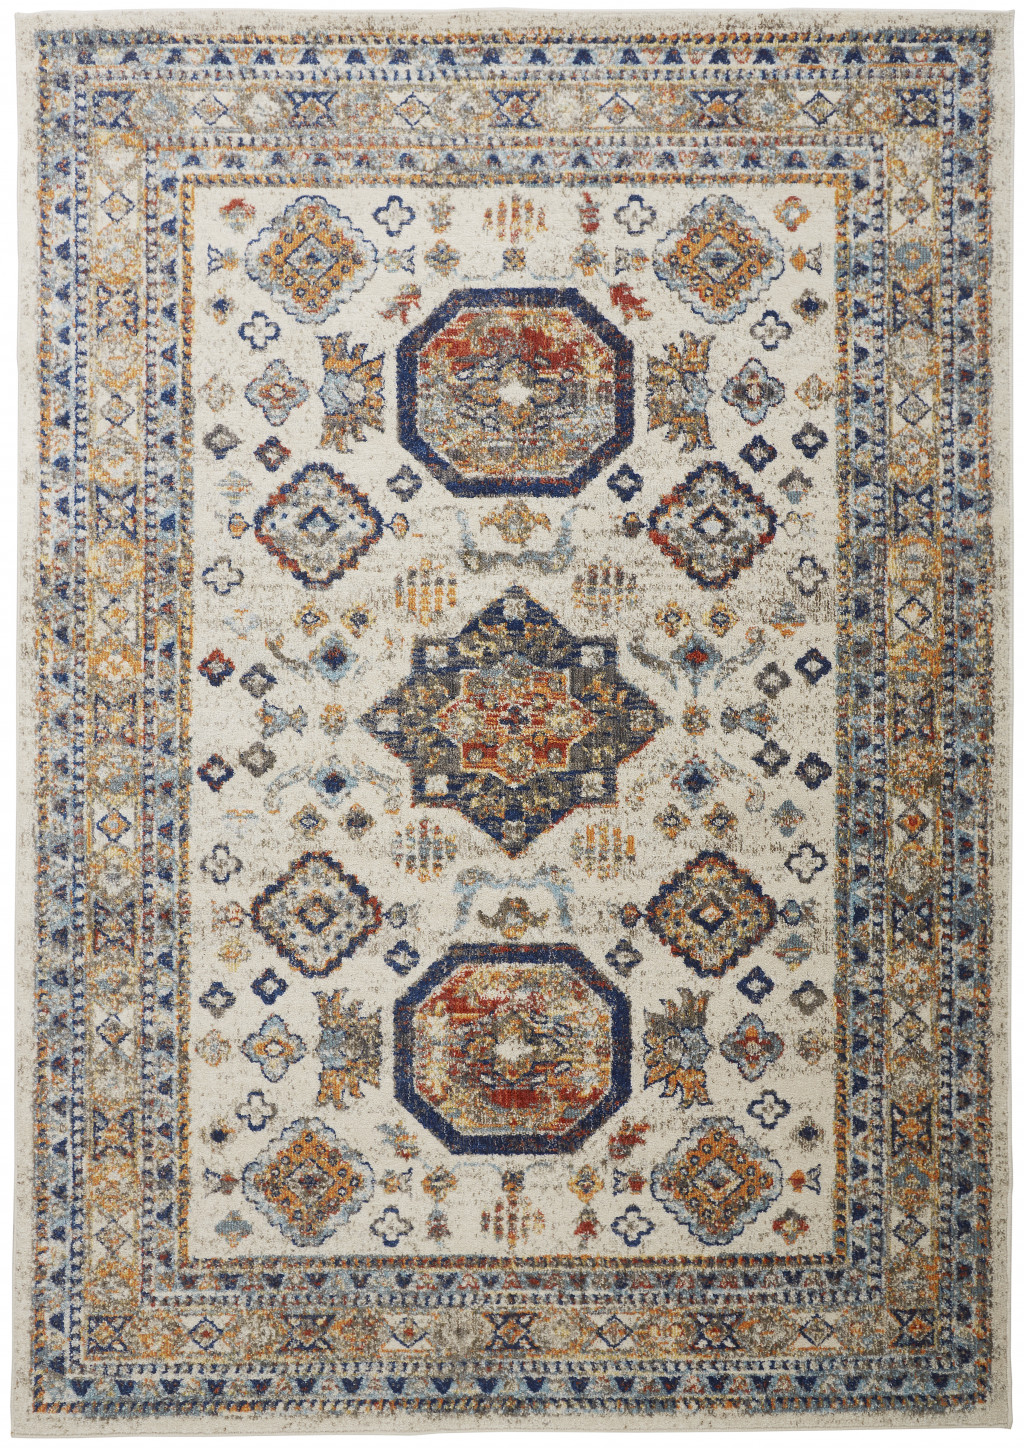 7' X 10' Ivory Orange And Blue Floral Stain Resistant Area Rug-513800-1